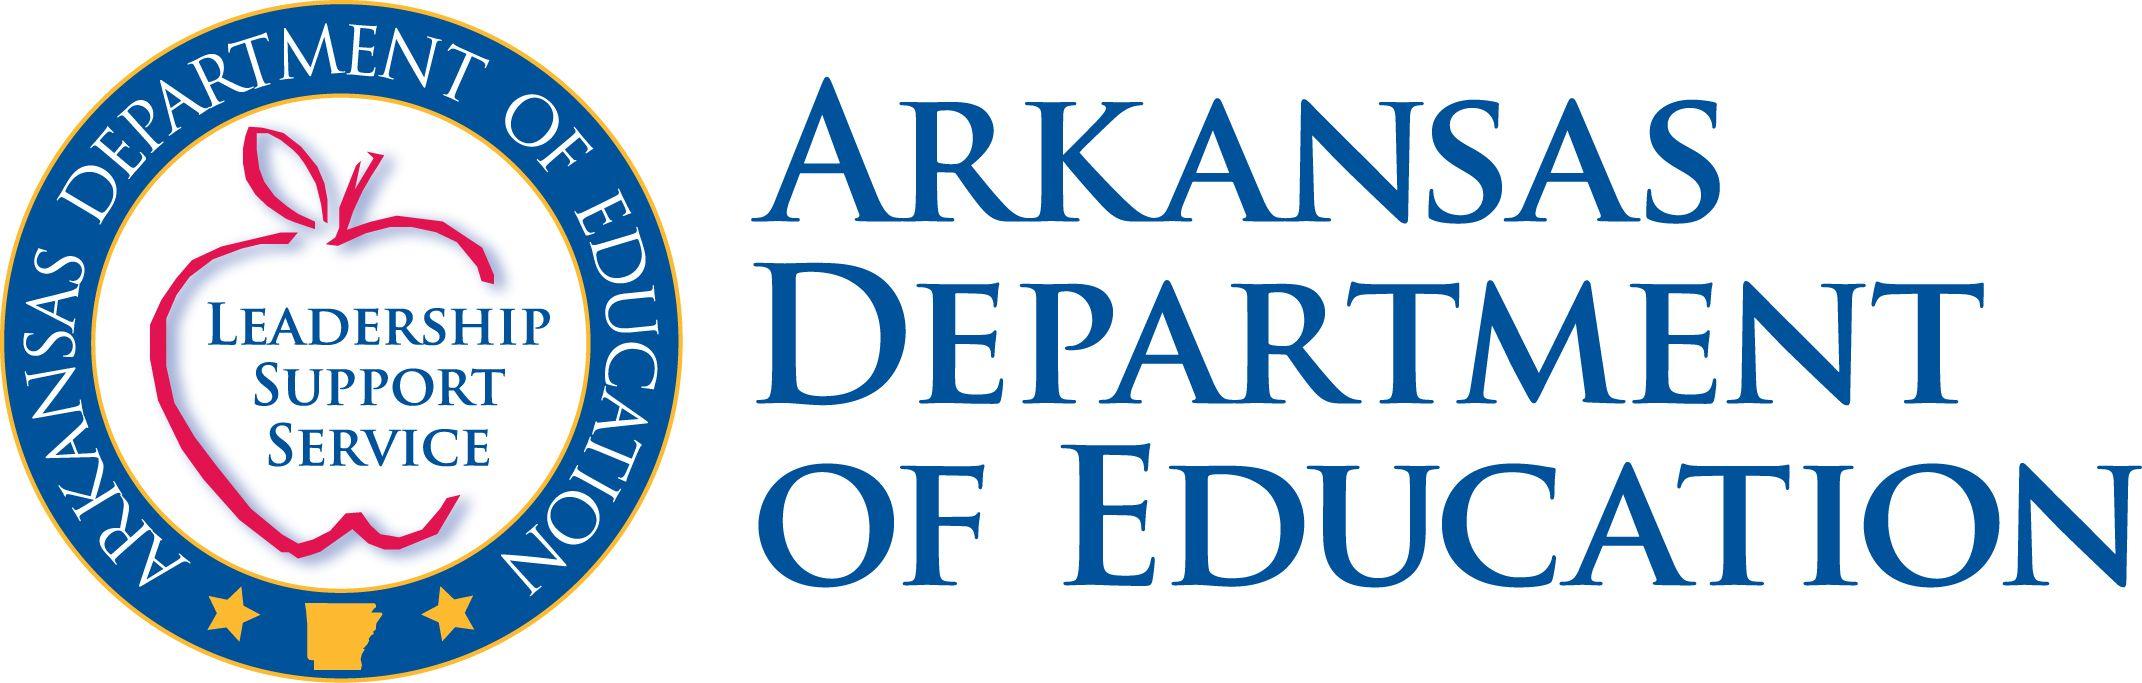 Us Department of Education Logo - State Board of Education | Arkansas Department of Education